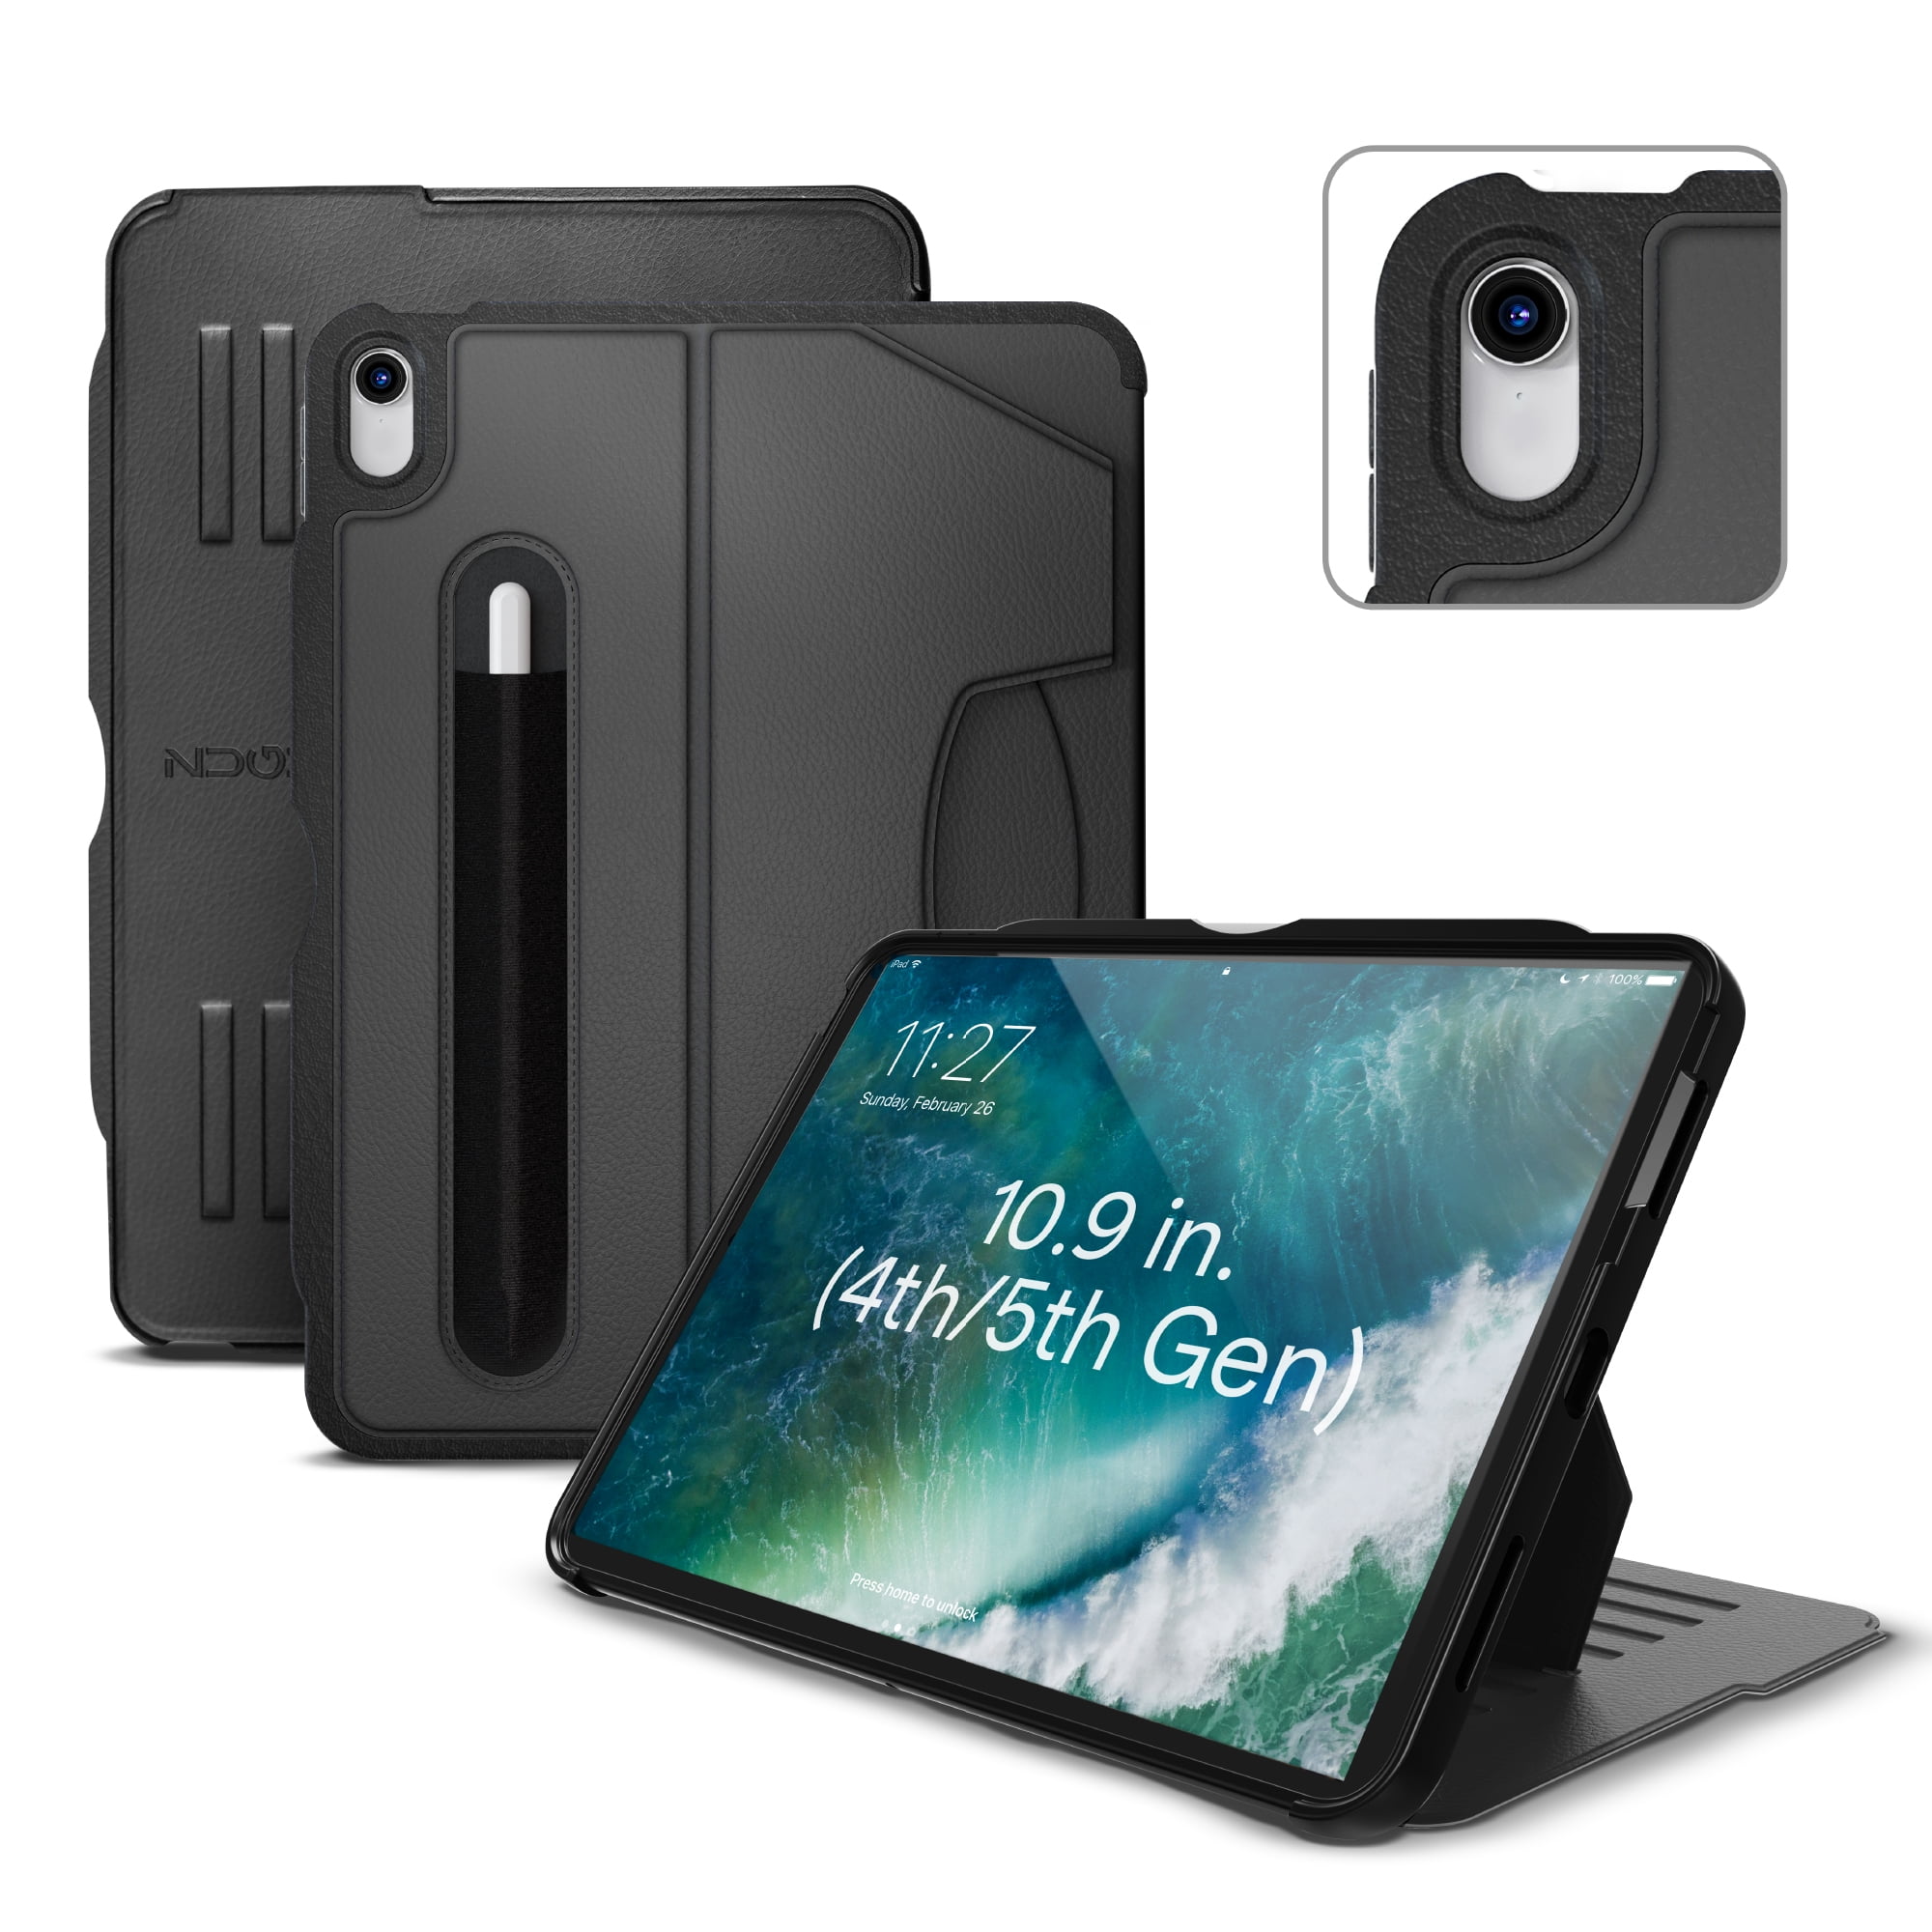 Zugu (New Model) The Alpha Case Cover for 10.9 inch iPad Air Gen 4 2020- Black